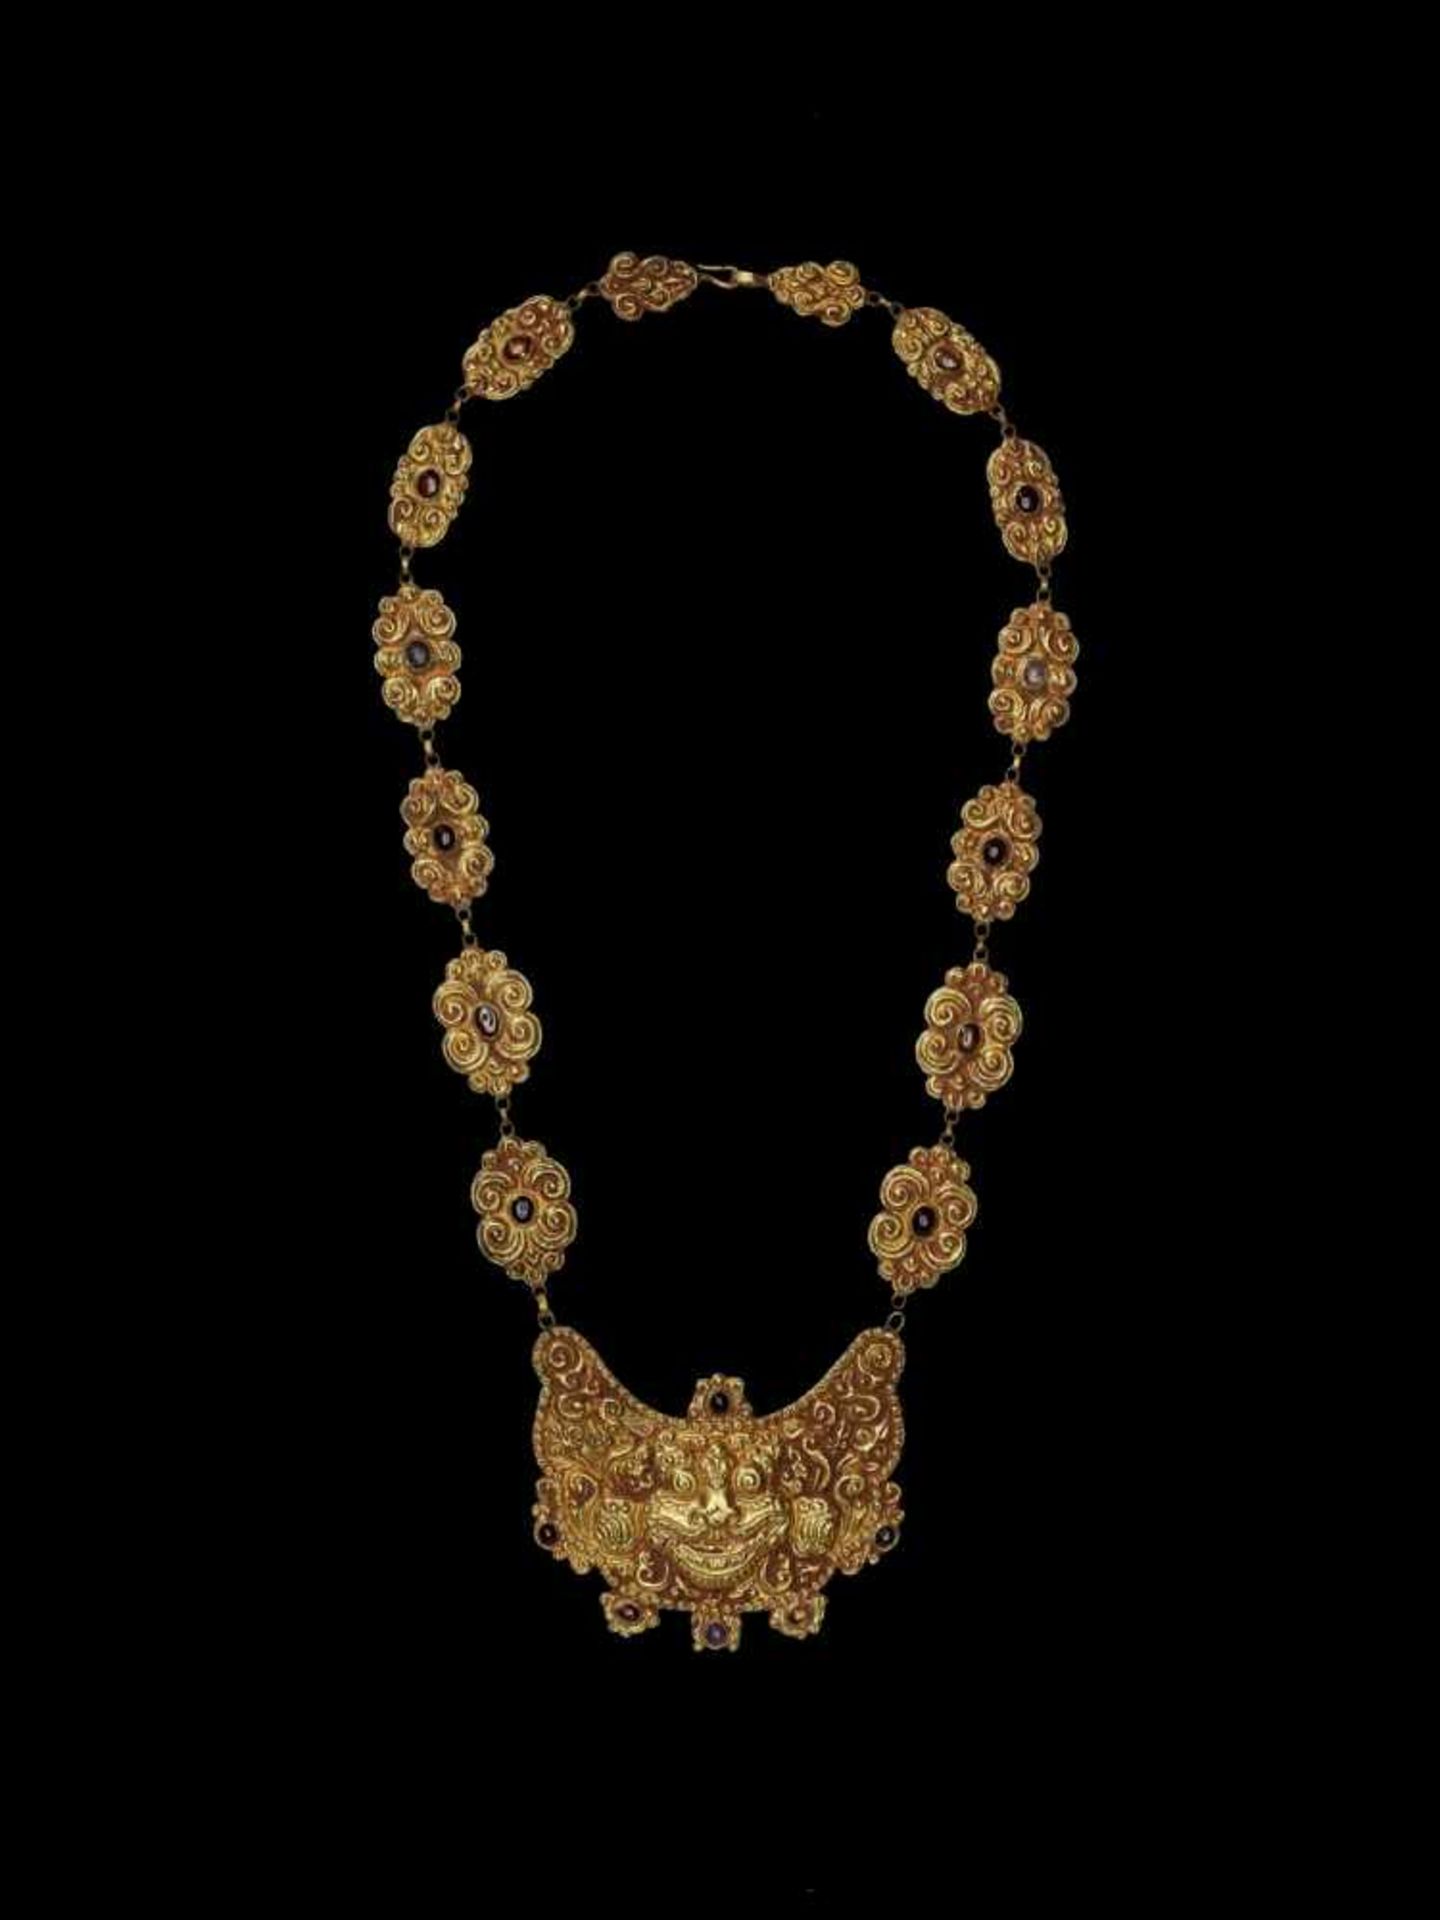 A CHAM REPOUSSÉ GOLD NECKLACE WITH A PECTORAL DEPICTING KALA Central Cham kingdom, most probably